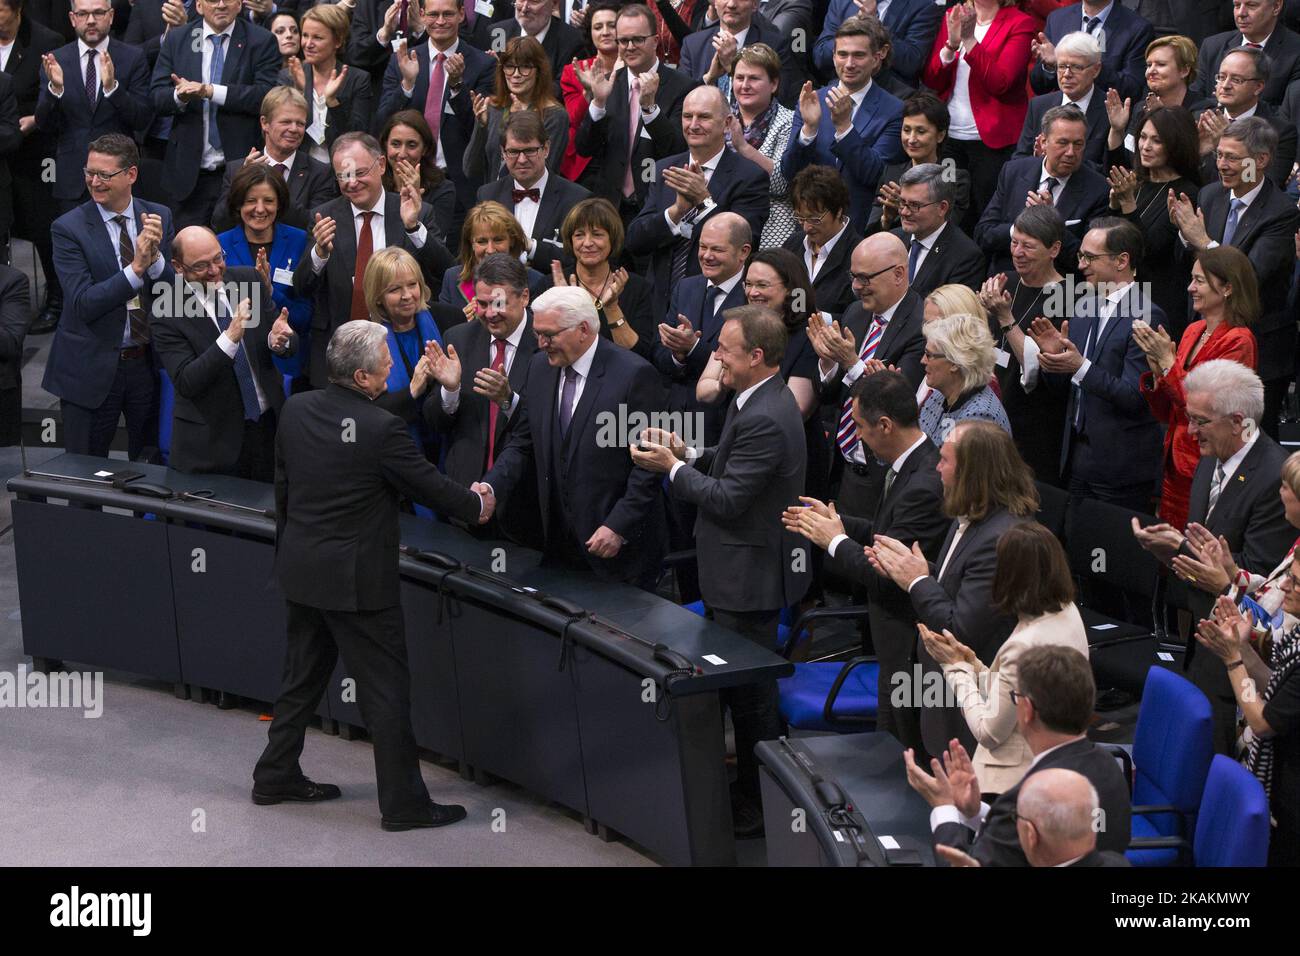 German new President Frank-Walter Steinmeier (first row, 2R) is congratulated from German President Joachim Gauck after being elected by the 16th Bundesversammlung (Federal Assembly) at the Bundestag in Berlin, Germany on February 12, 2017. Steinmeier, 61, obtained xyz votes out of 1,260 being the official candidate of the government parties CDU/CSU and SPD and supported from FDP and Green party, against poverty researcher Christoph Butterwegge, nominated by the left party Die Linke and Albrecht Glaser, nominated by the far right party AfD (Alternative for Germany). (Photo by Emmanuele Contini Stock Photo